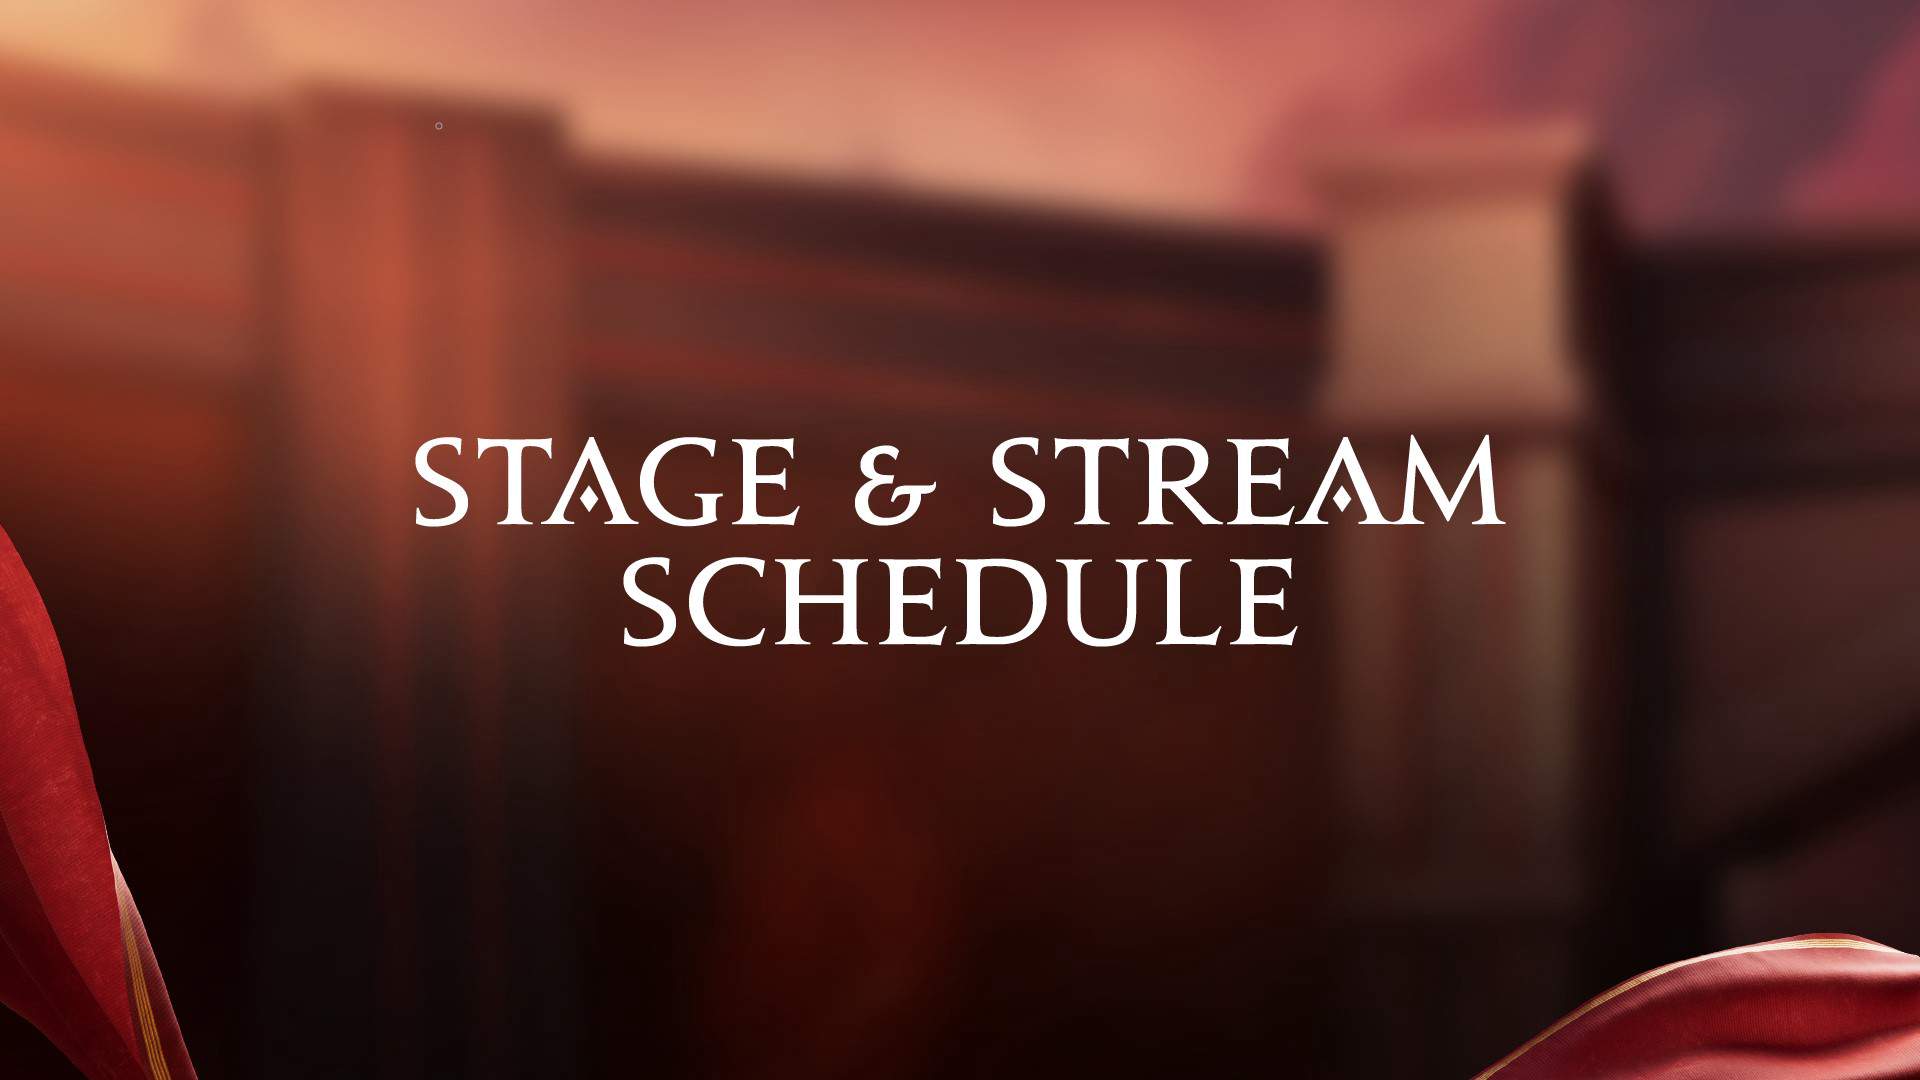 Stage and stream schedule. A red ribbon with gold trim is seen at the bottom of the banner.